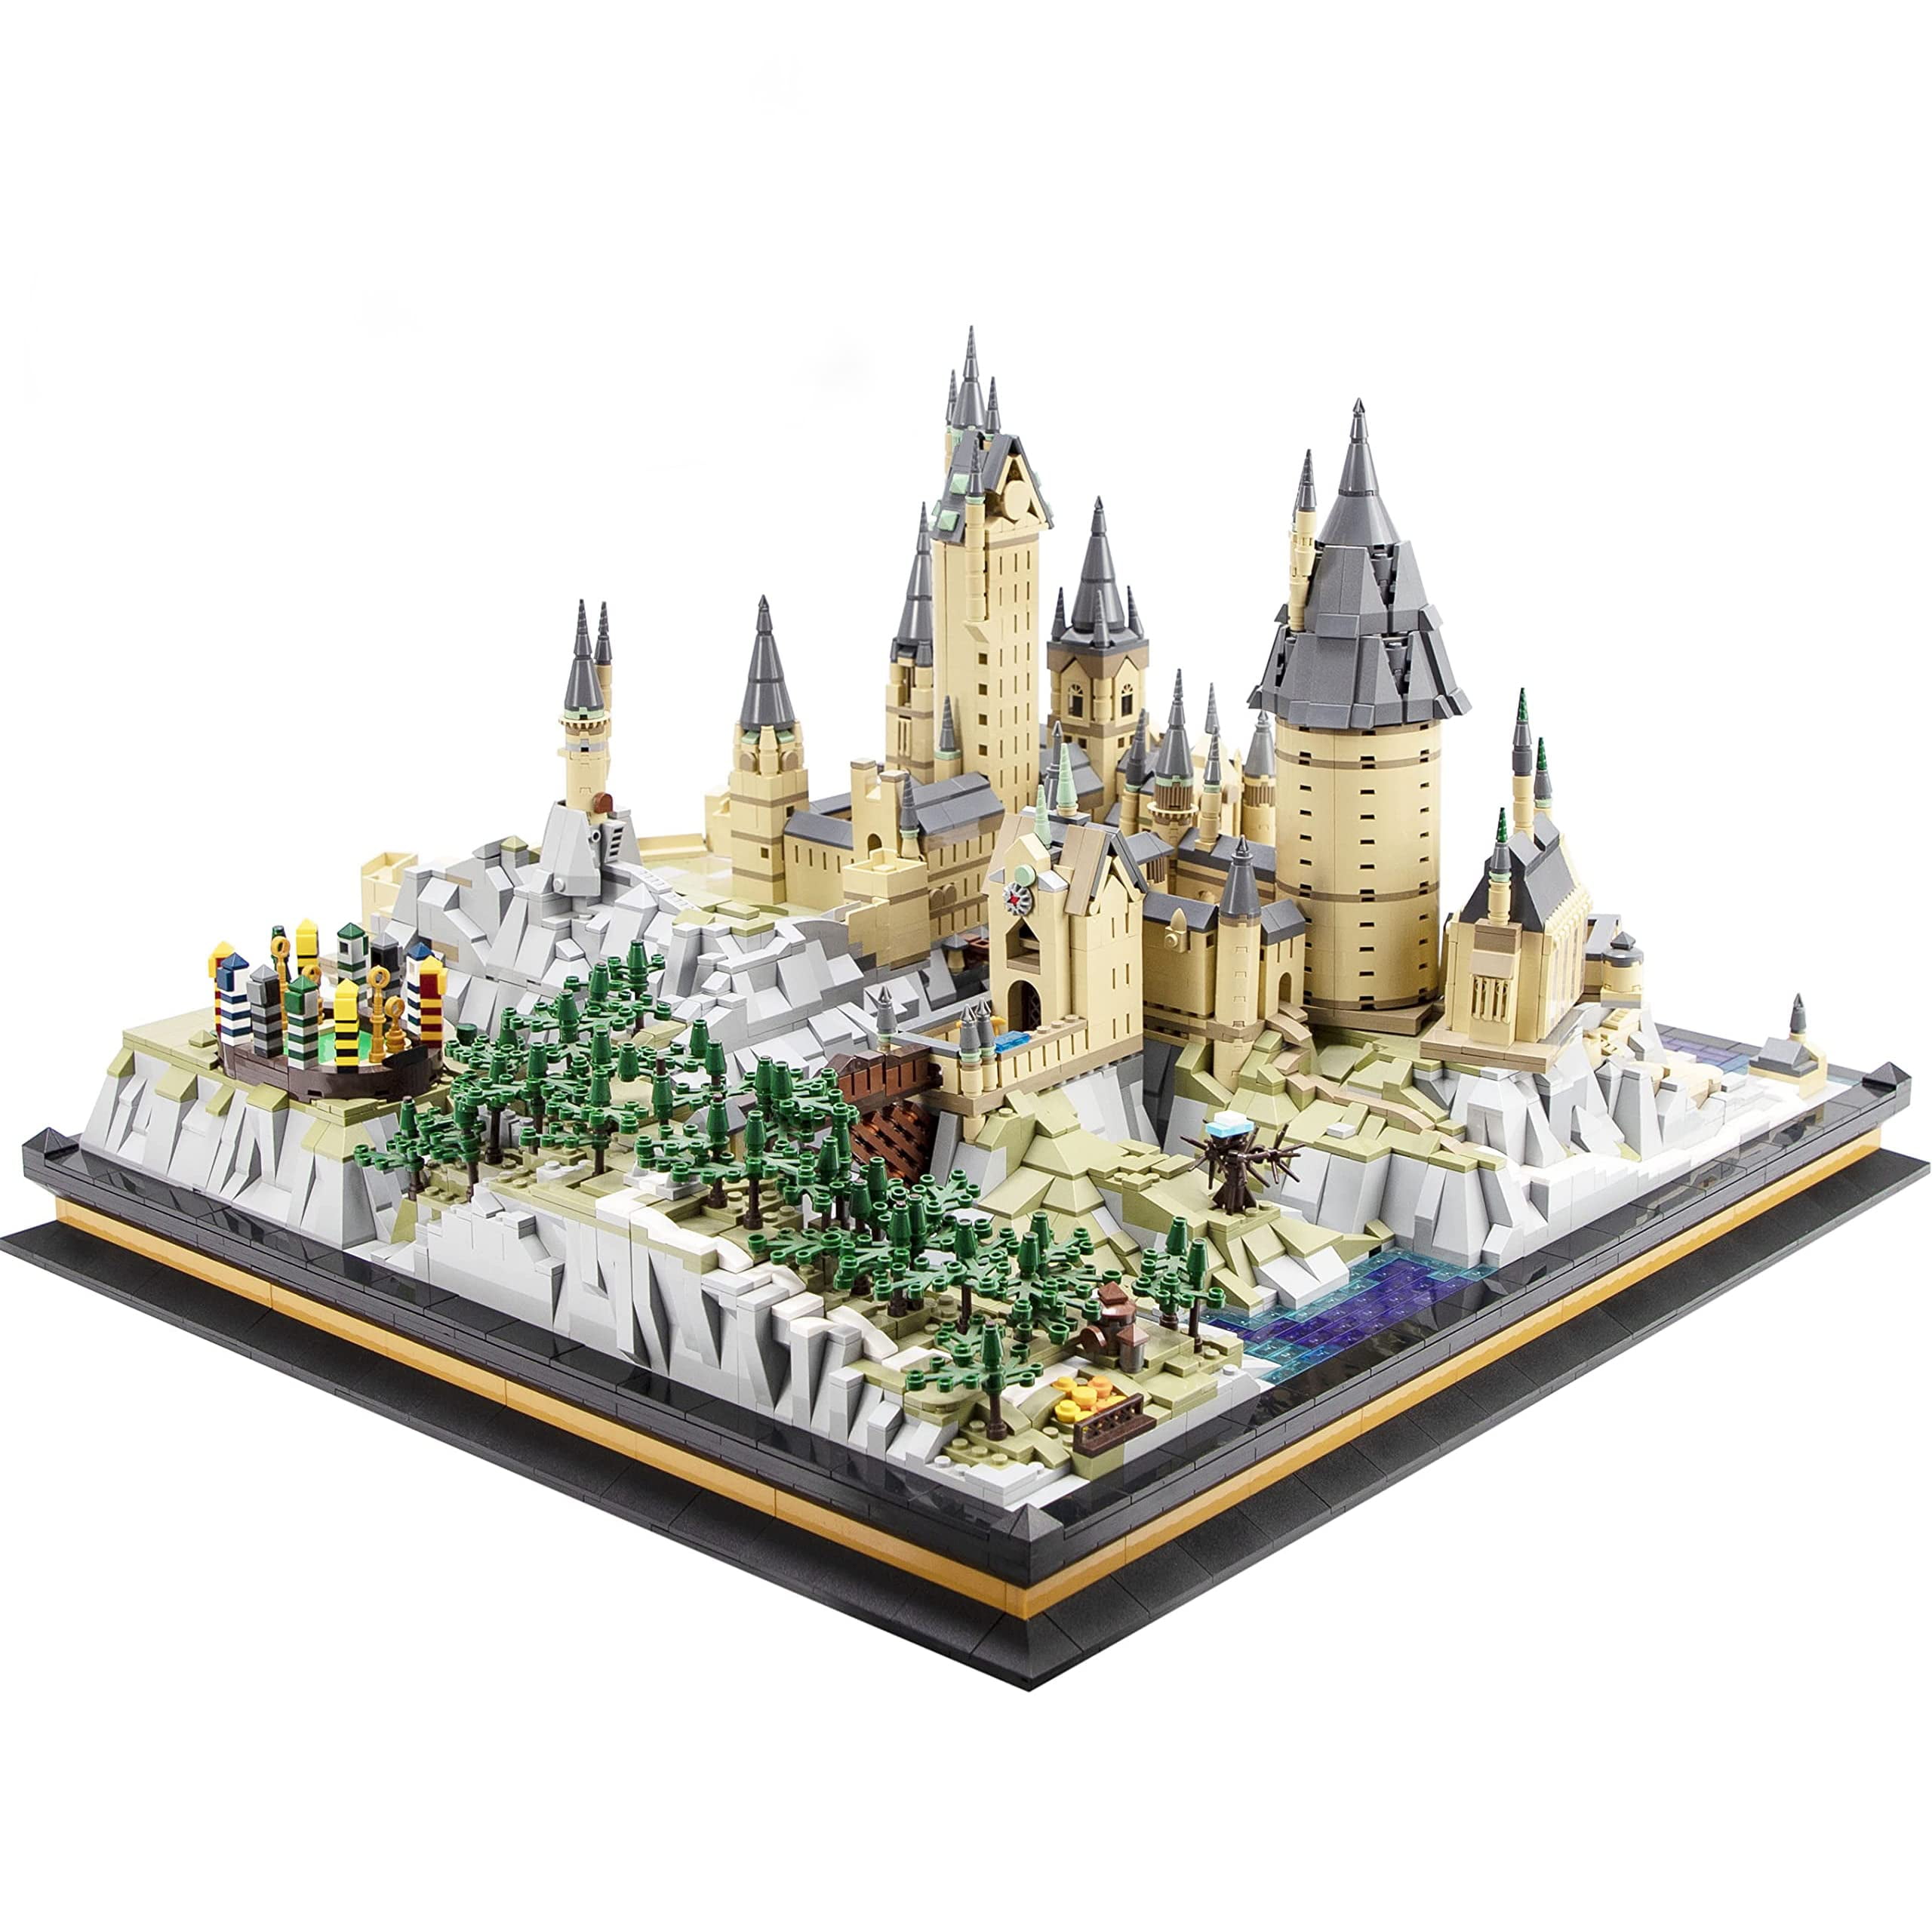 Lego Announces It's Second Largest Playset To Date, The 6000+ Piece Hogwarts  Castle For $399.99